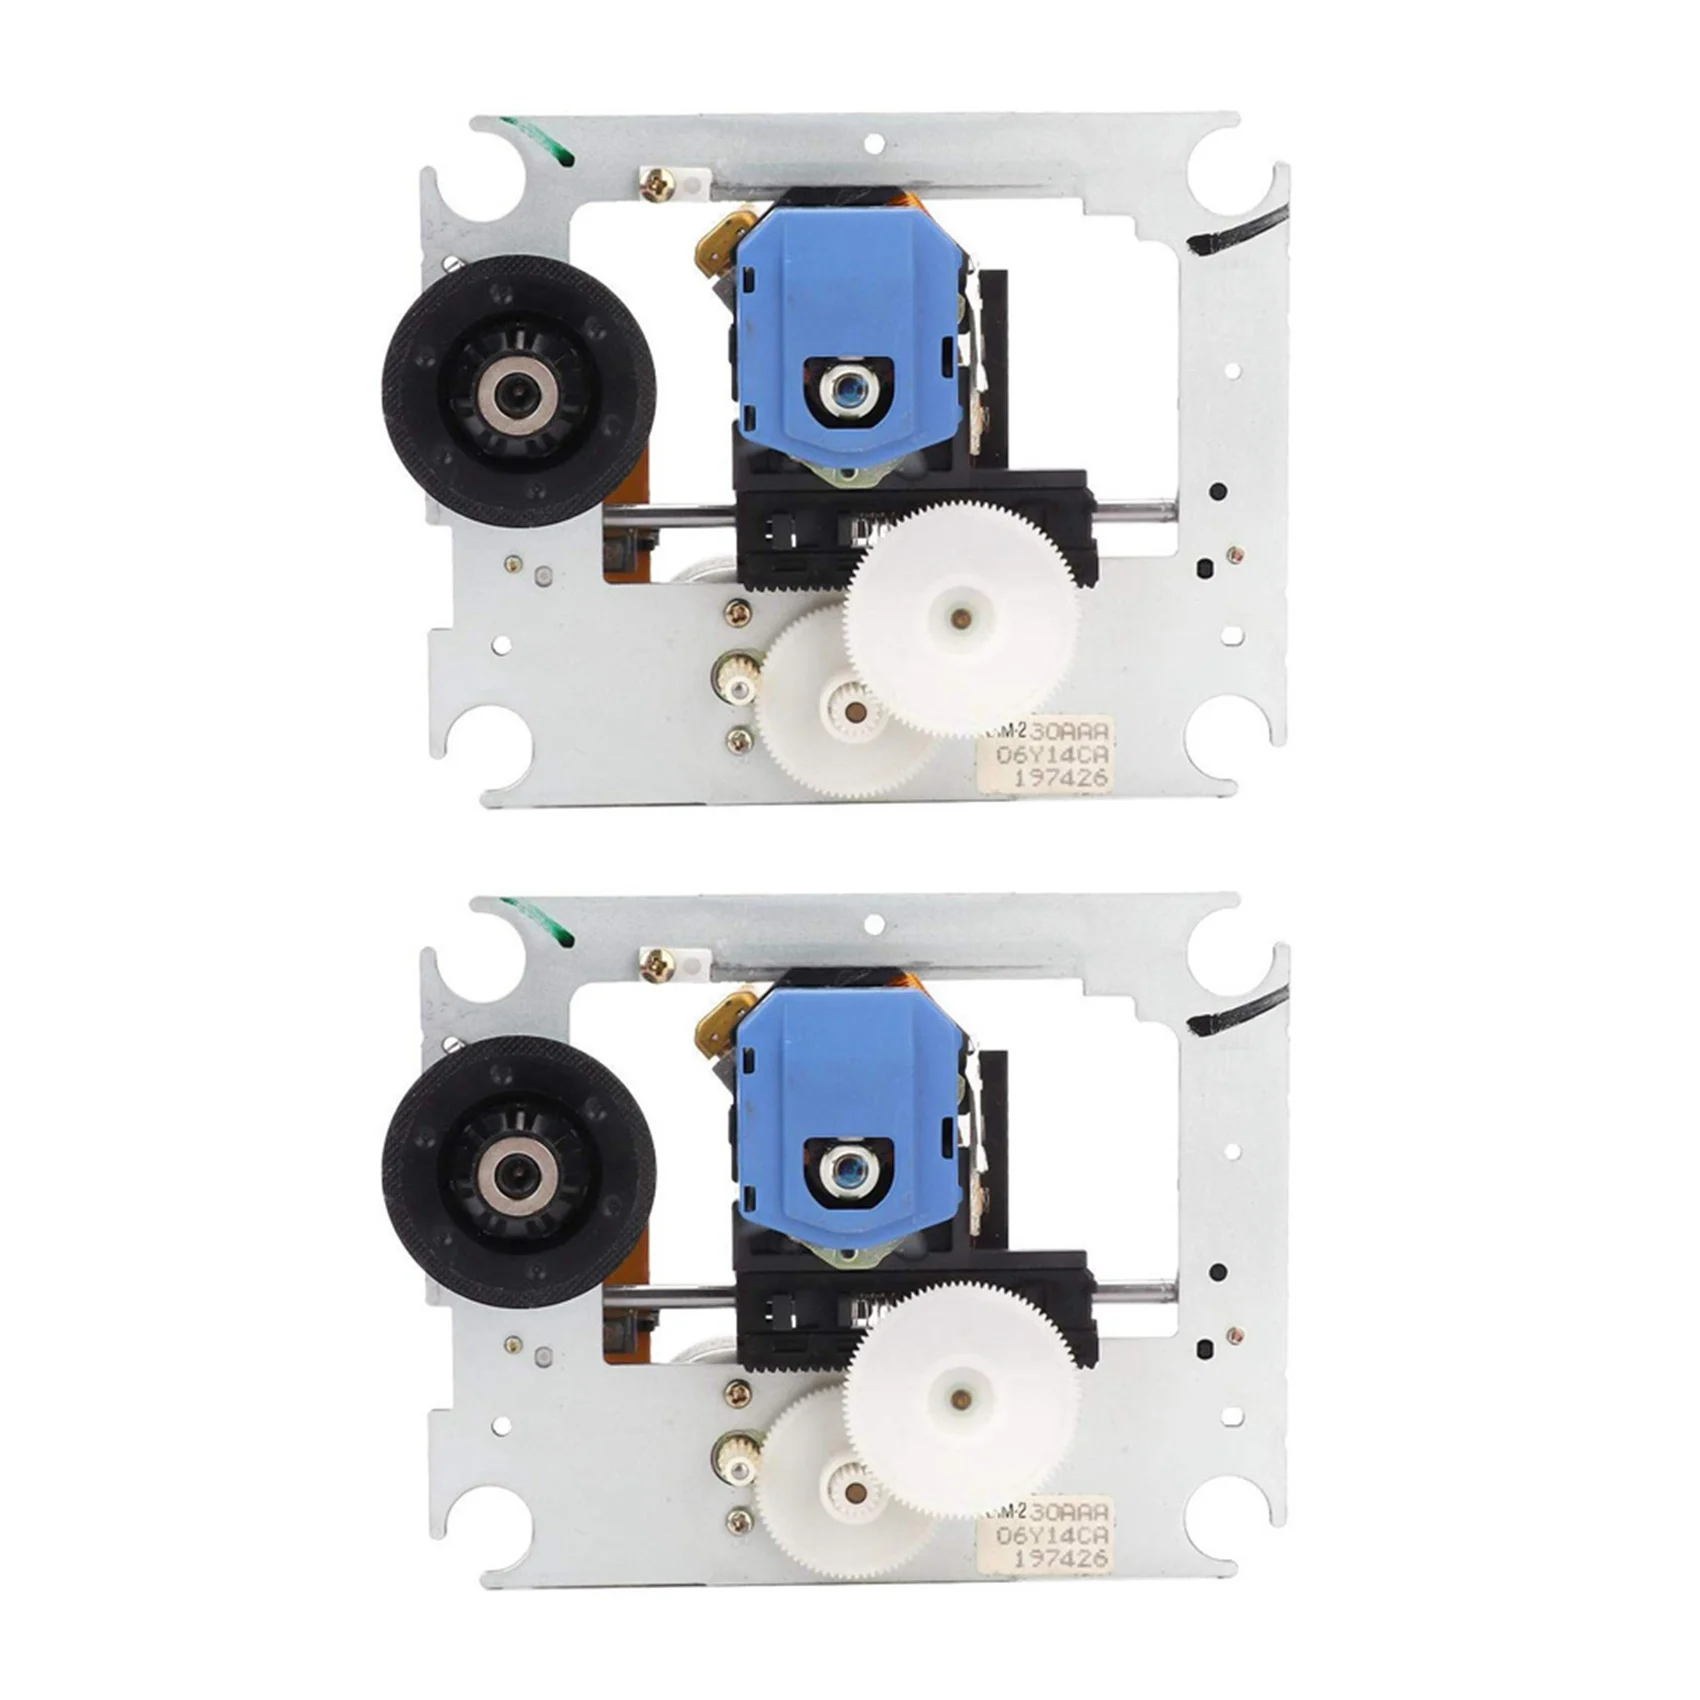 

2X KHM-230AAA DVD Optical Lasers Lens with Bracket Visible Light Lasers Head Replacement Repair Part